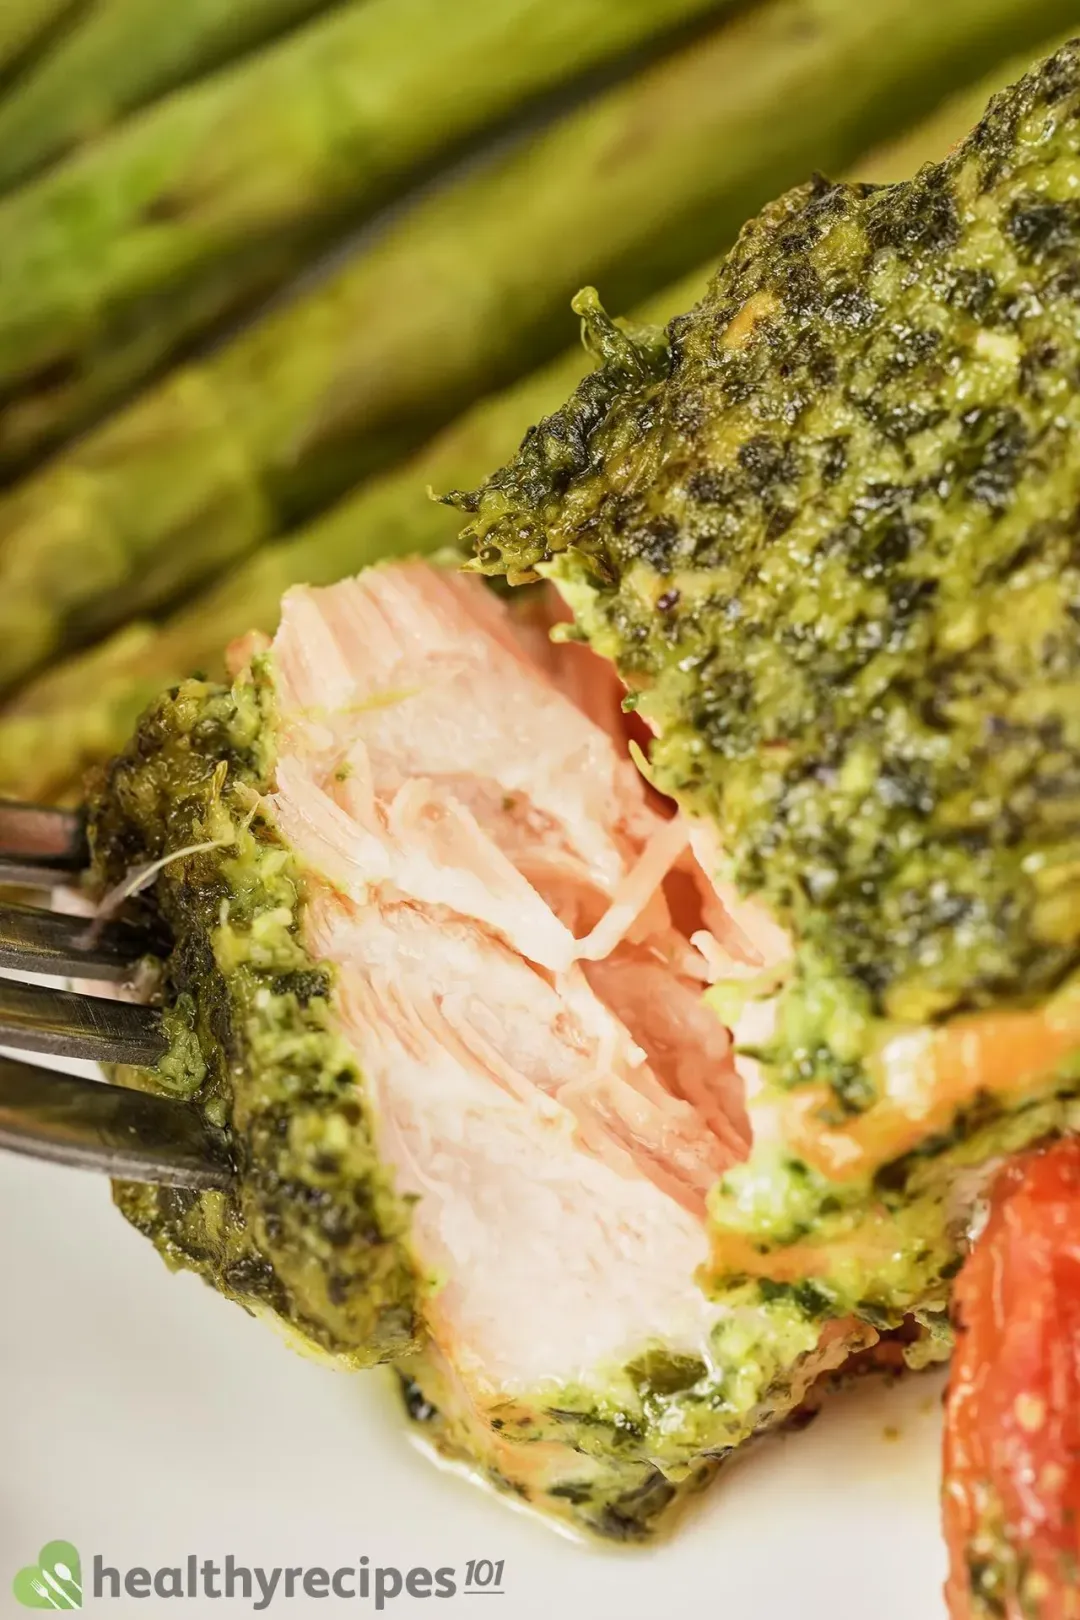 A close-up shot of a pesto salmon fillet with some baked asparagus and cherry tomatoes on the side